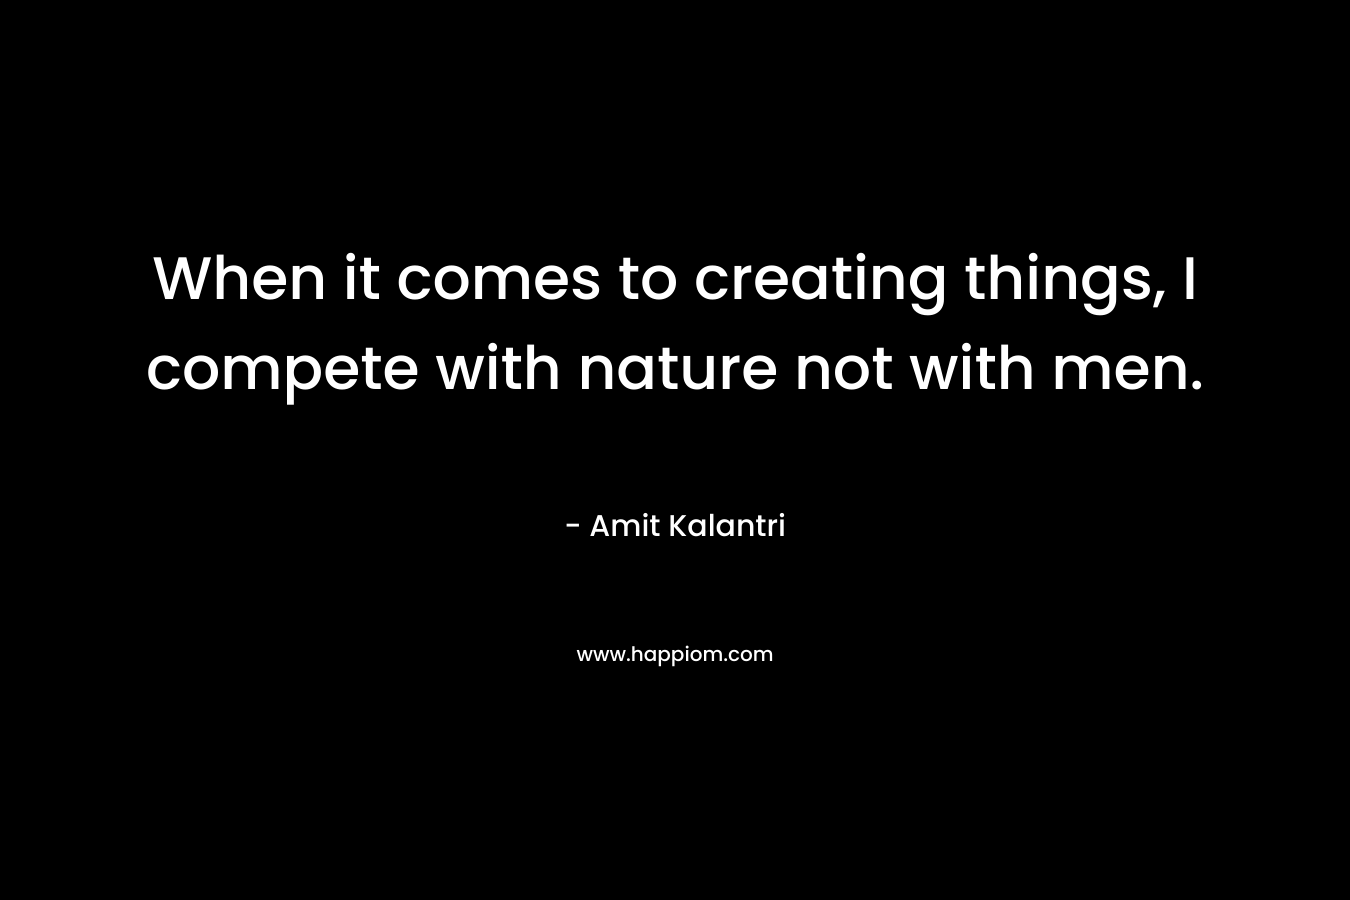 When it comes to creating things, I compete with nature not with men.